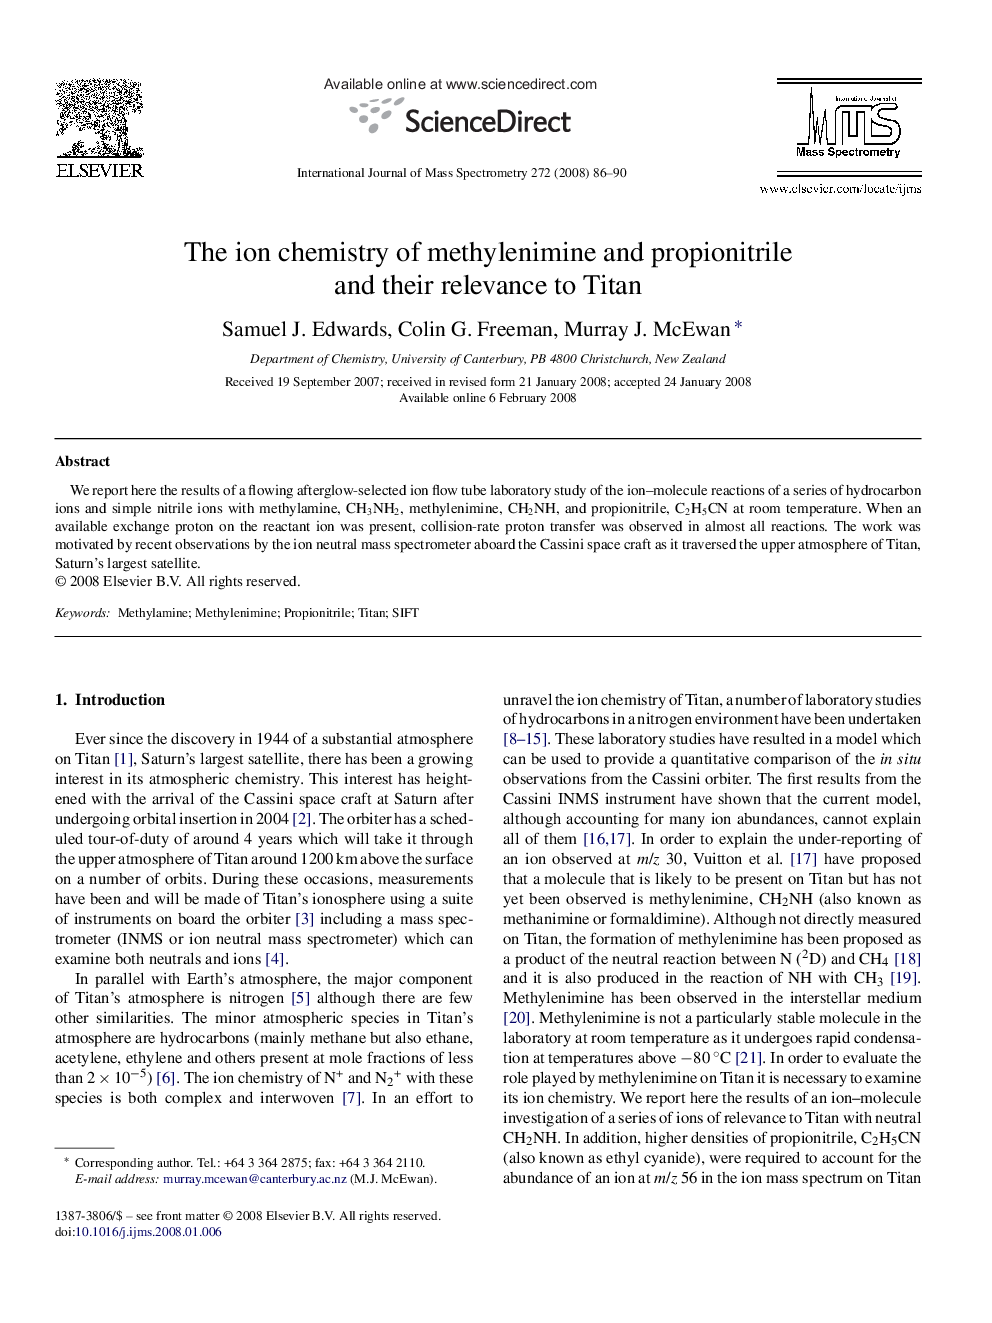 The ion chemistry of methylenimine and propionitrile and their relevance to Titan